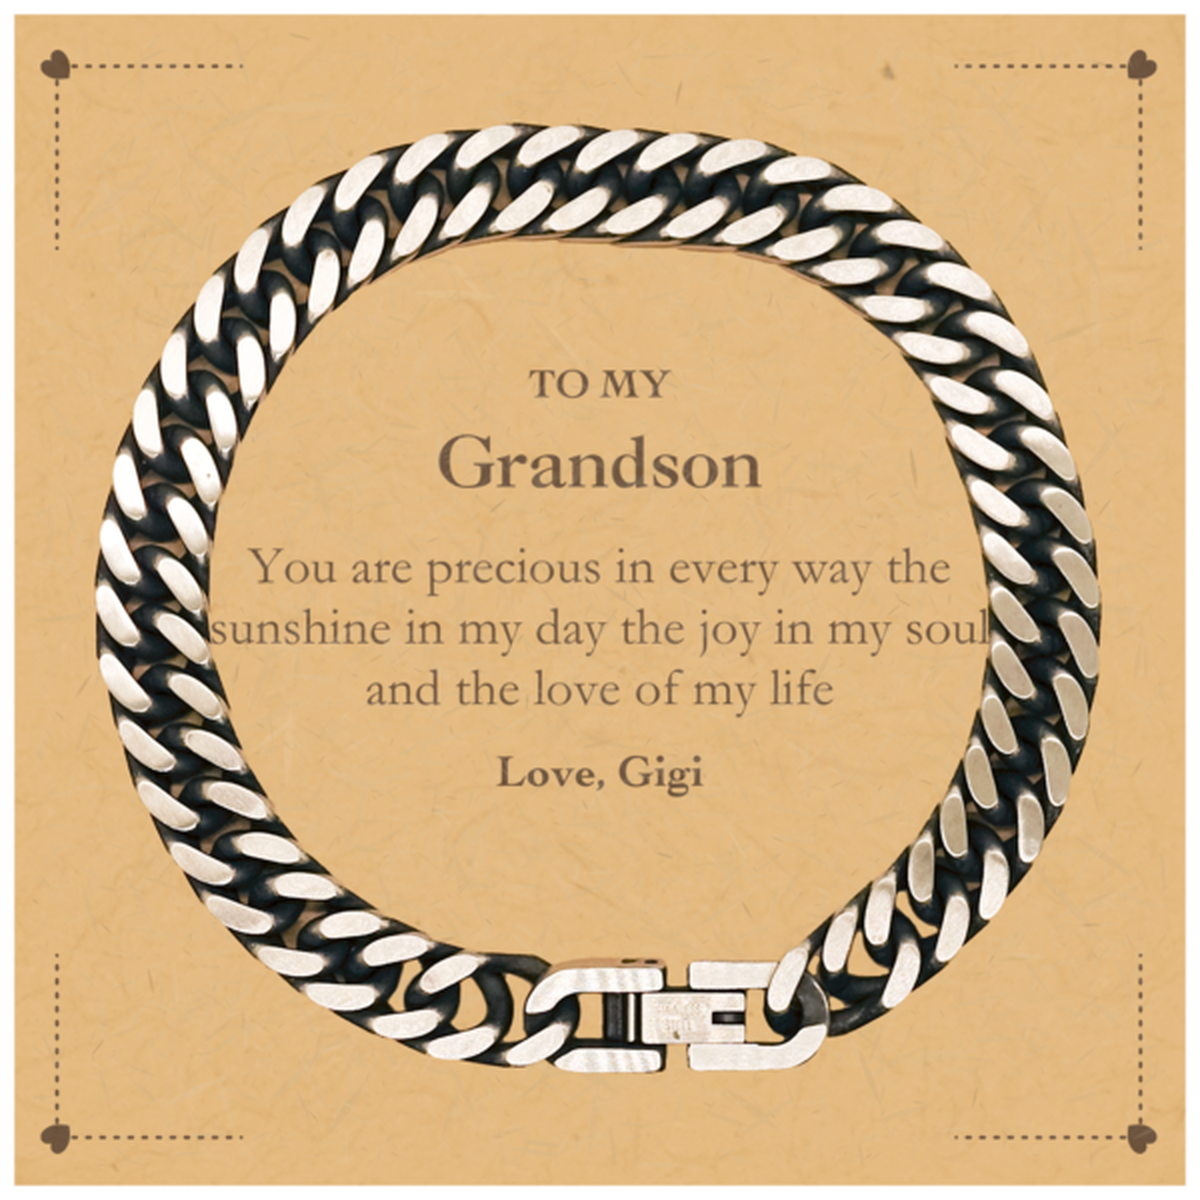 Graduation Gifts for Grandson Cuban Link Chain Bracelet Present from Gigi, Christmas Grandson Birthday Gifts Grandson You are precious in every way the sunshine in my day. Love, Gigi